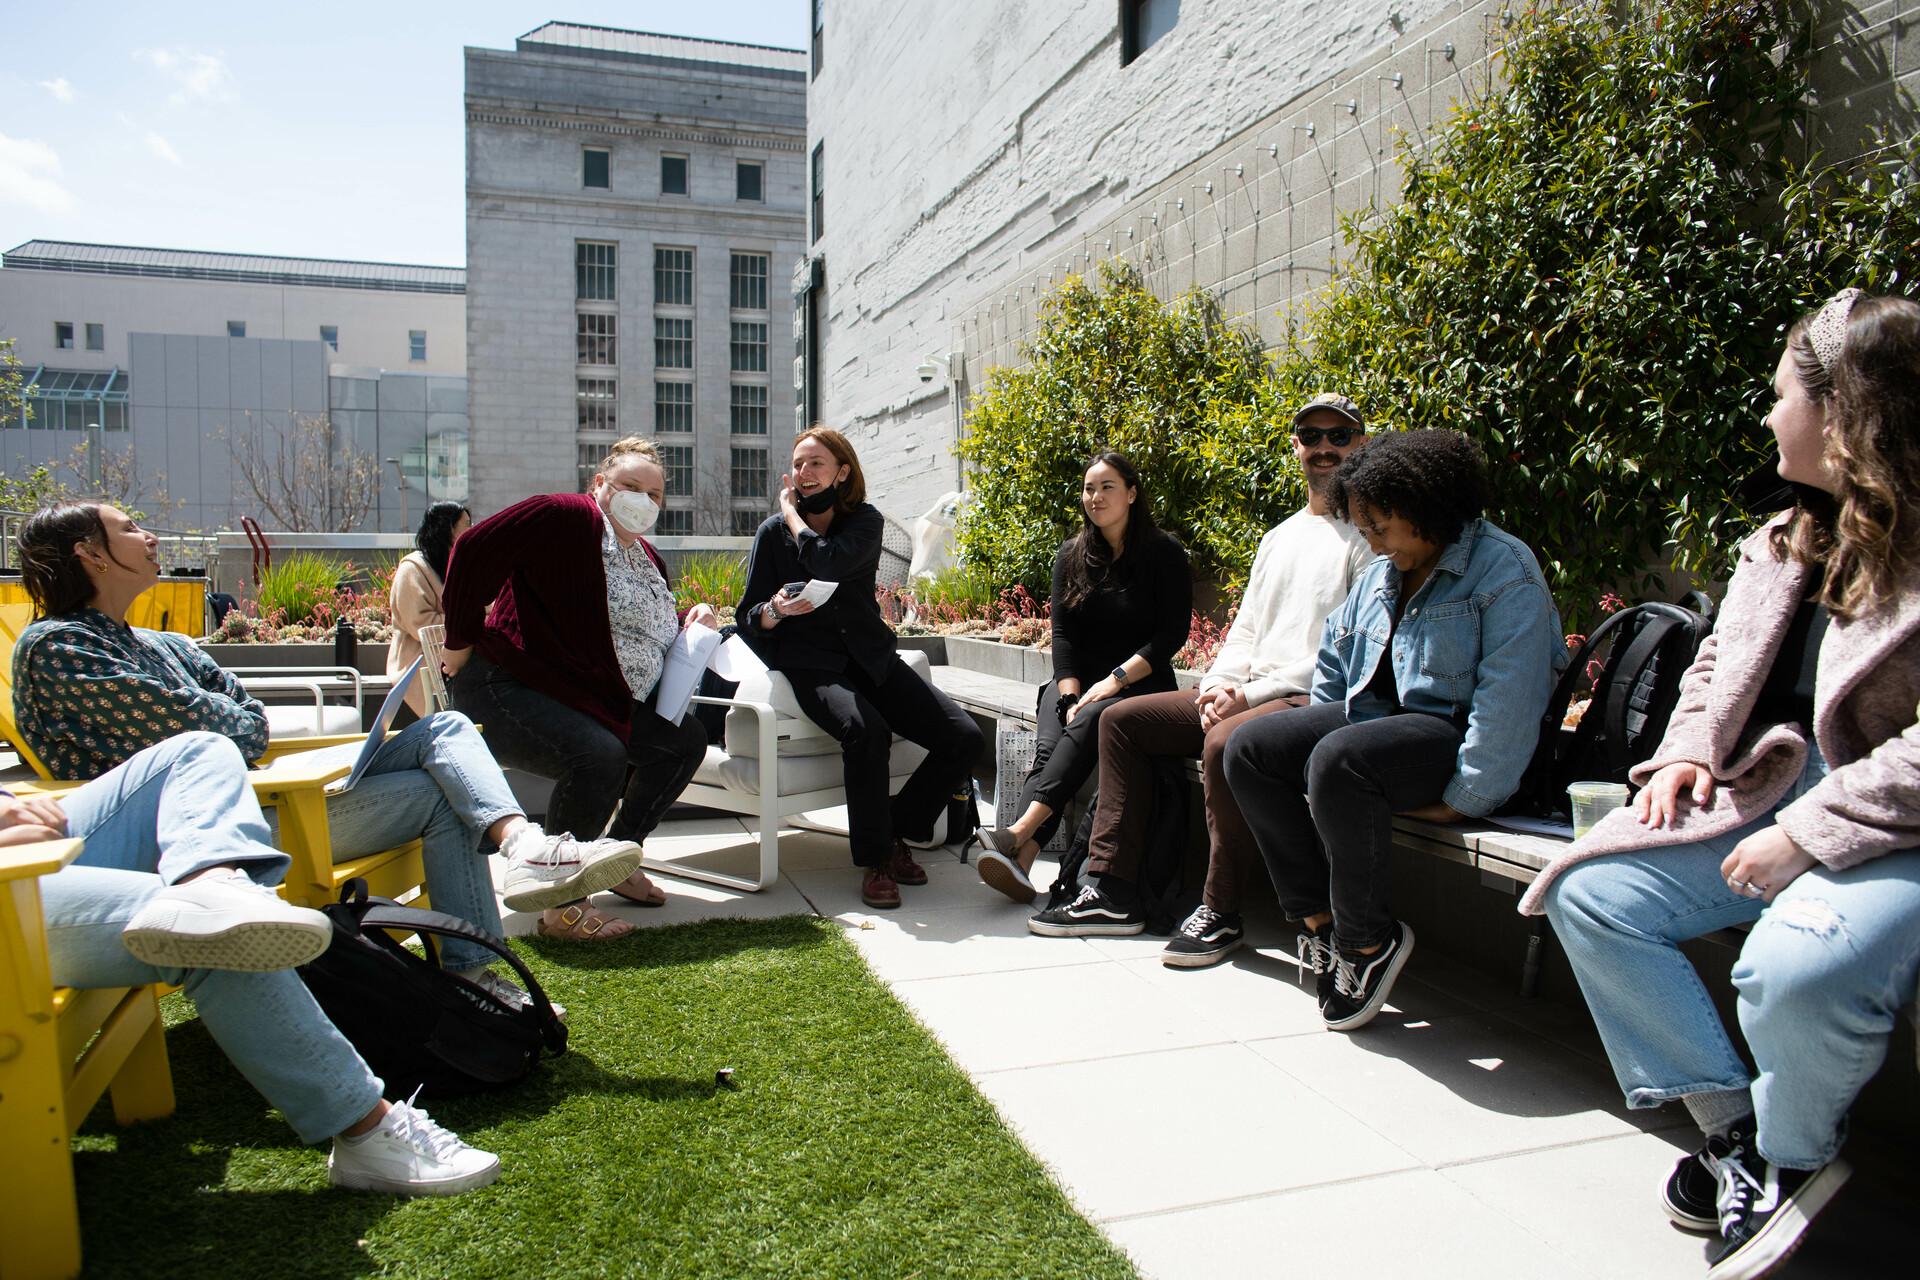 Students seated in a circle while in discussion, outside in a courtyard with buildings behind them and a little lawn underneath them.